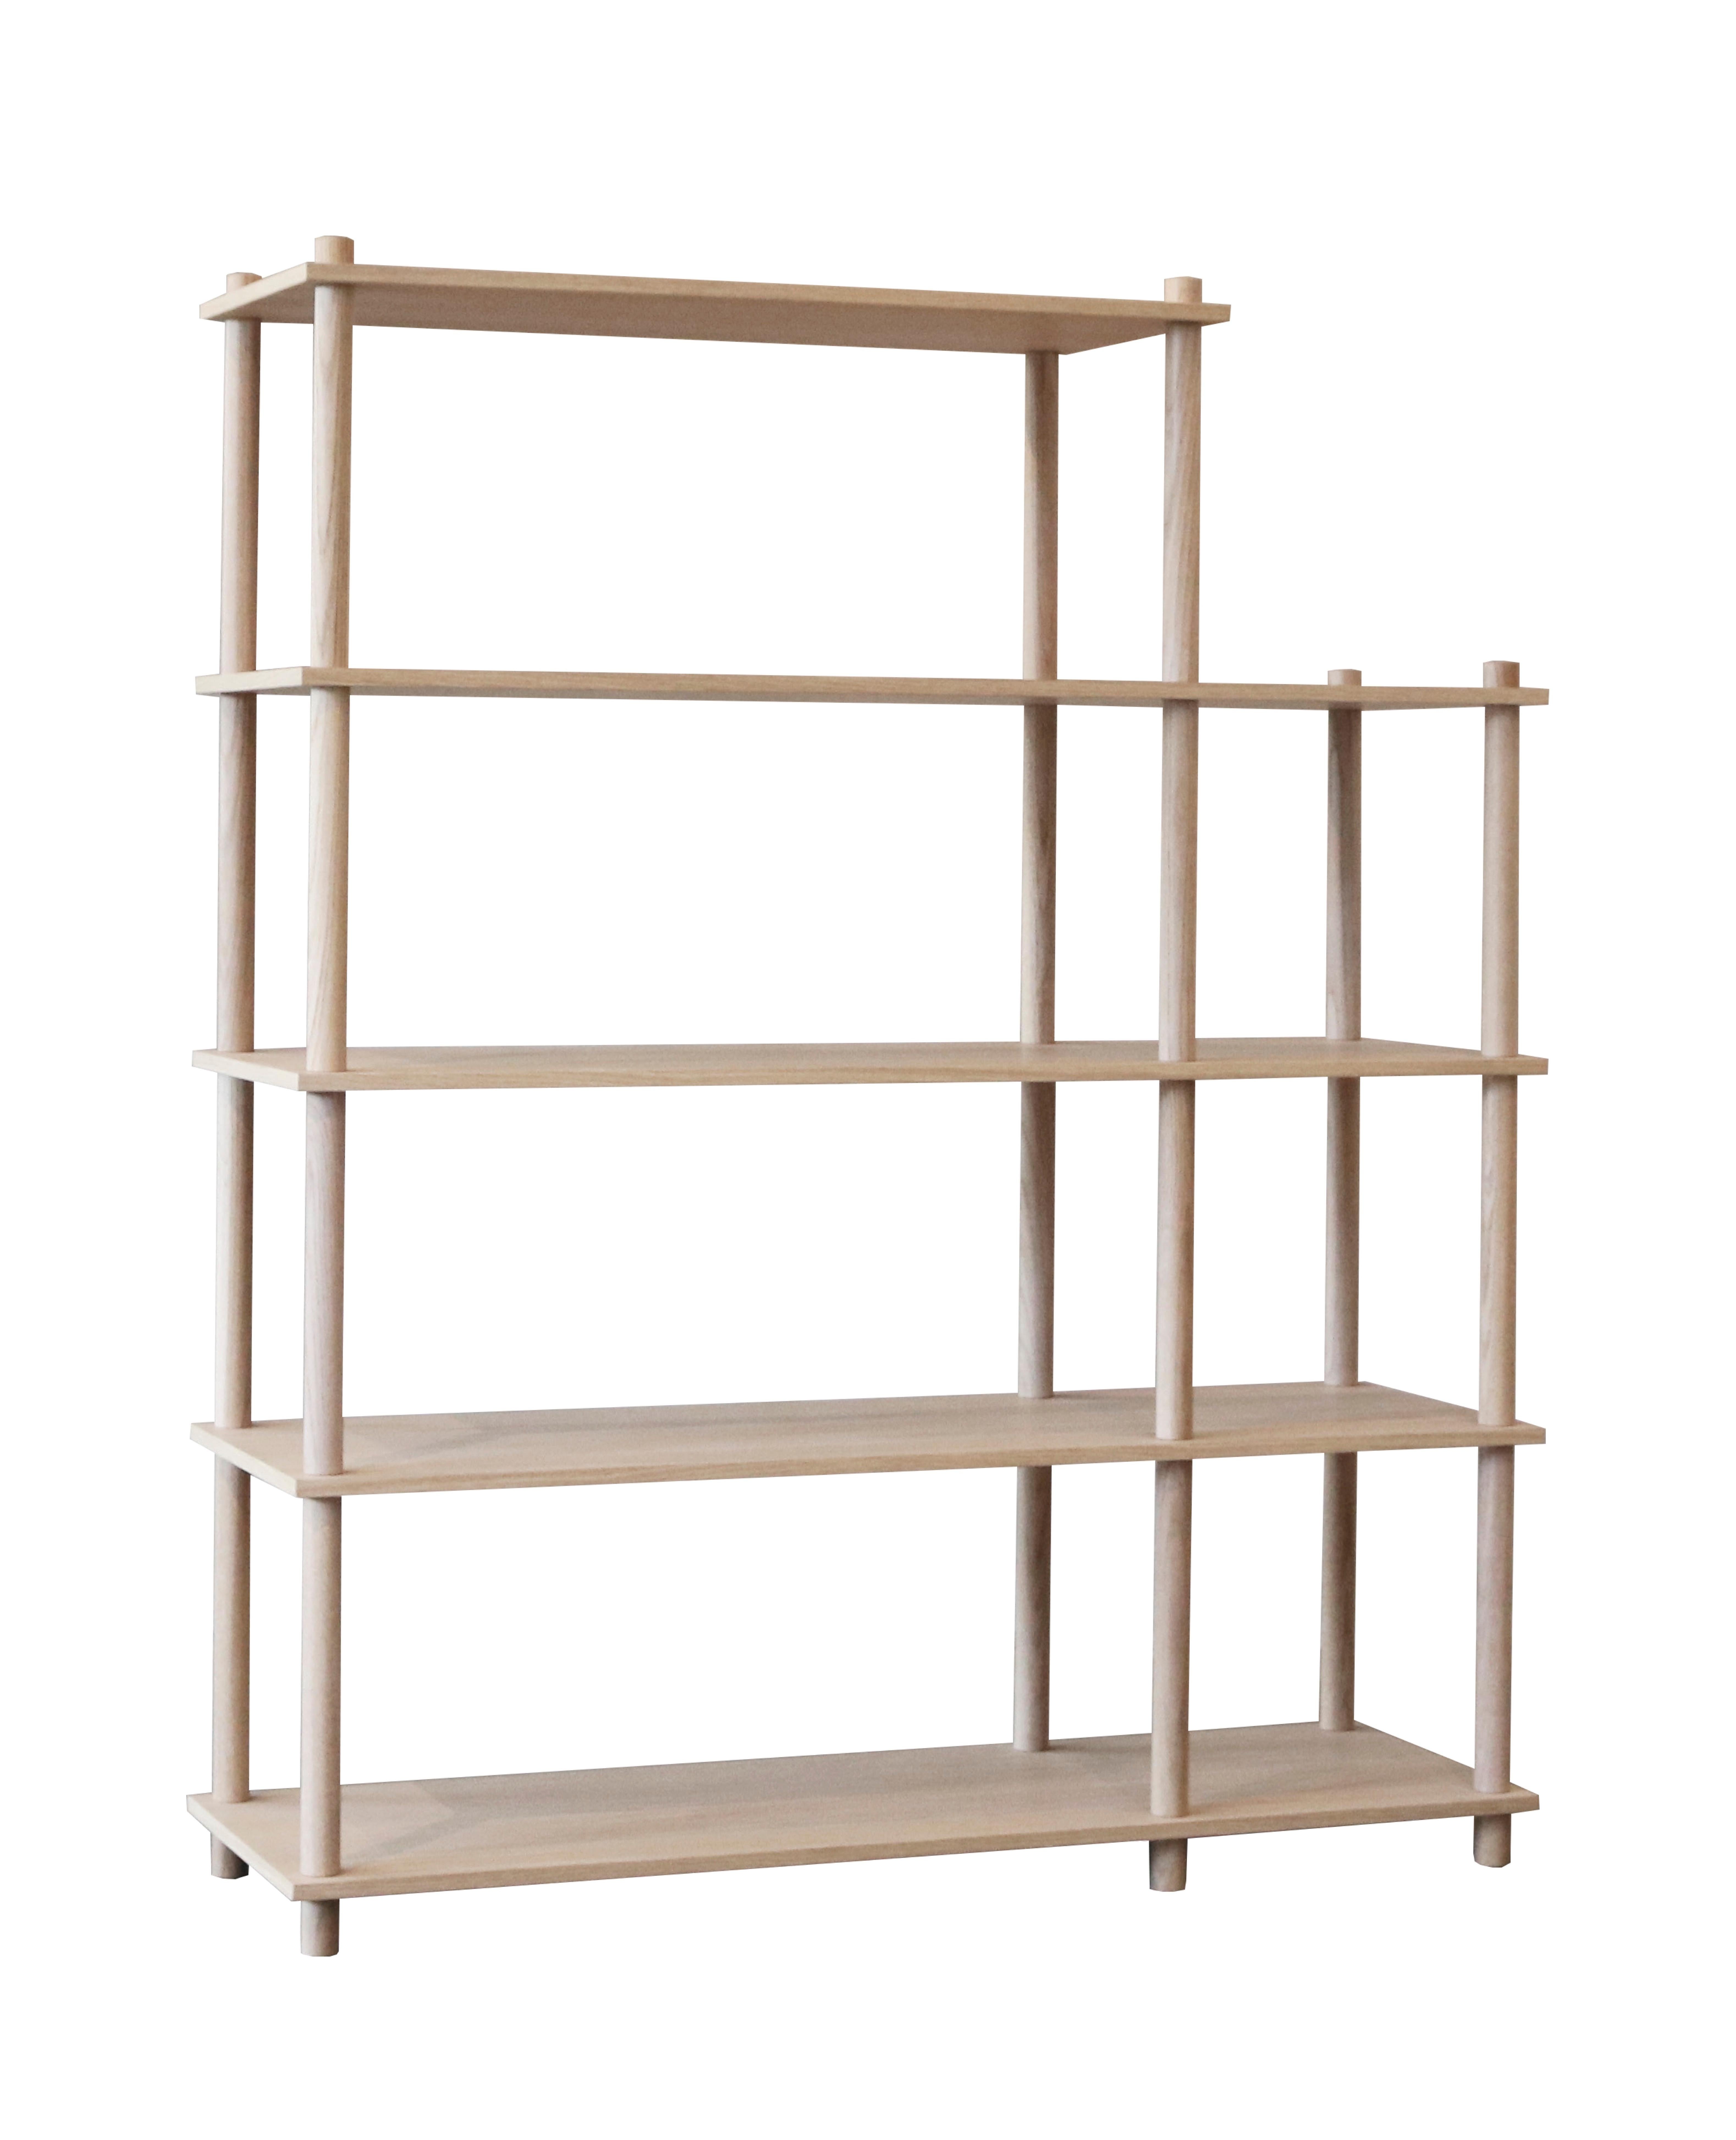 Oak elevate shelving IV by Camilla Akersveen and Christopher Konings
Materials: metal, oak.
Dimensions: D 40 x W 120 x H 147.9 cm
Available in matt lacquered oak or black oak. Different shelving sistems available.

Camilla Akersveen and